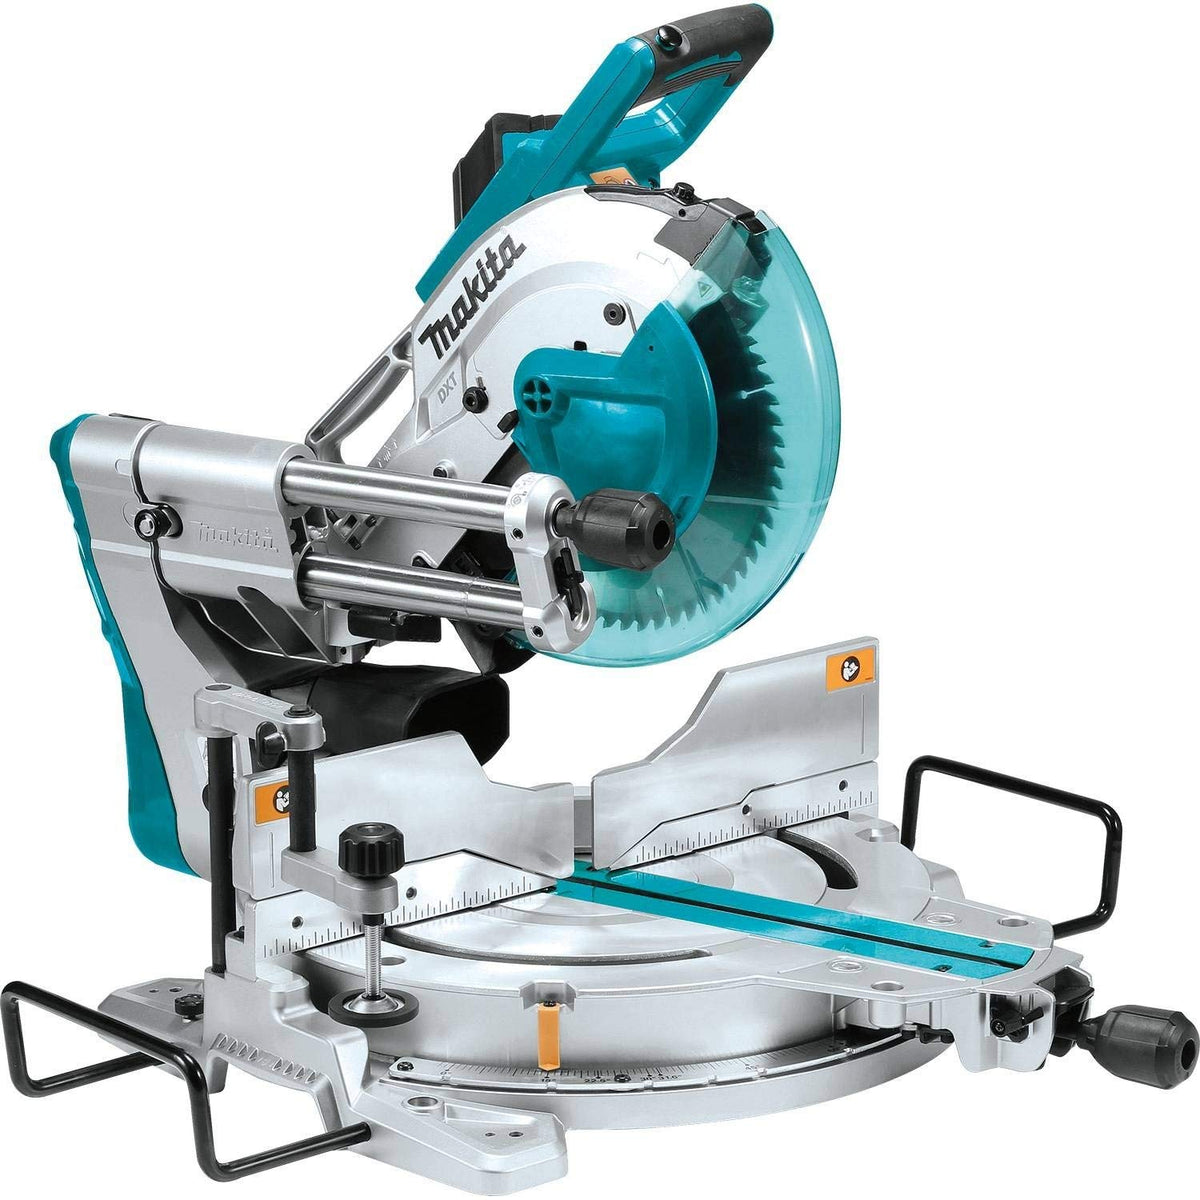 Makita LS1019L Dual-Bevel Sliding Compound Miter Saw With Laser, 13.0 Amps